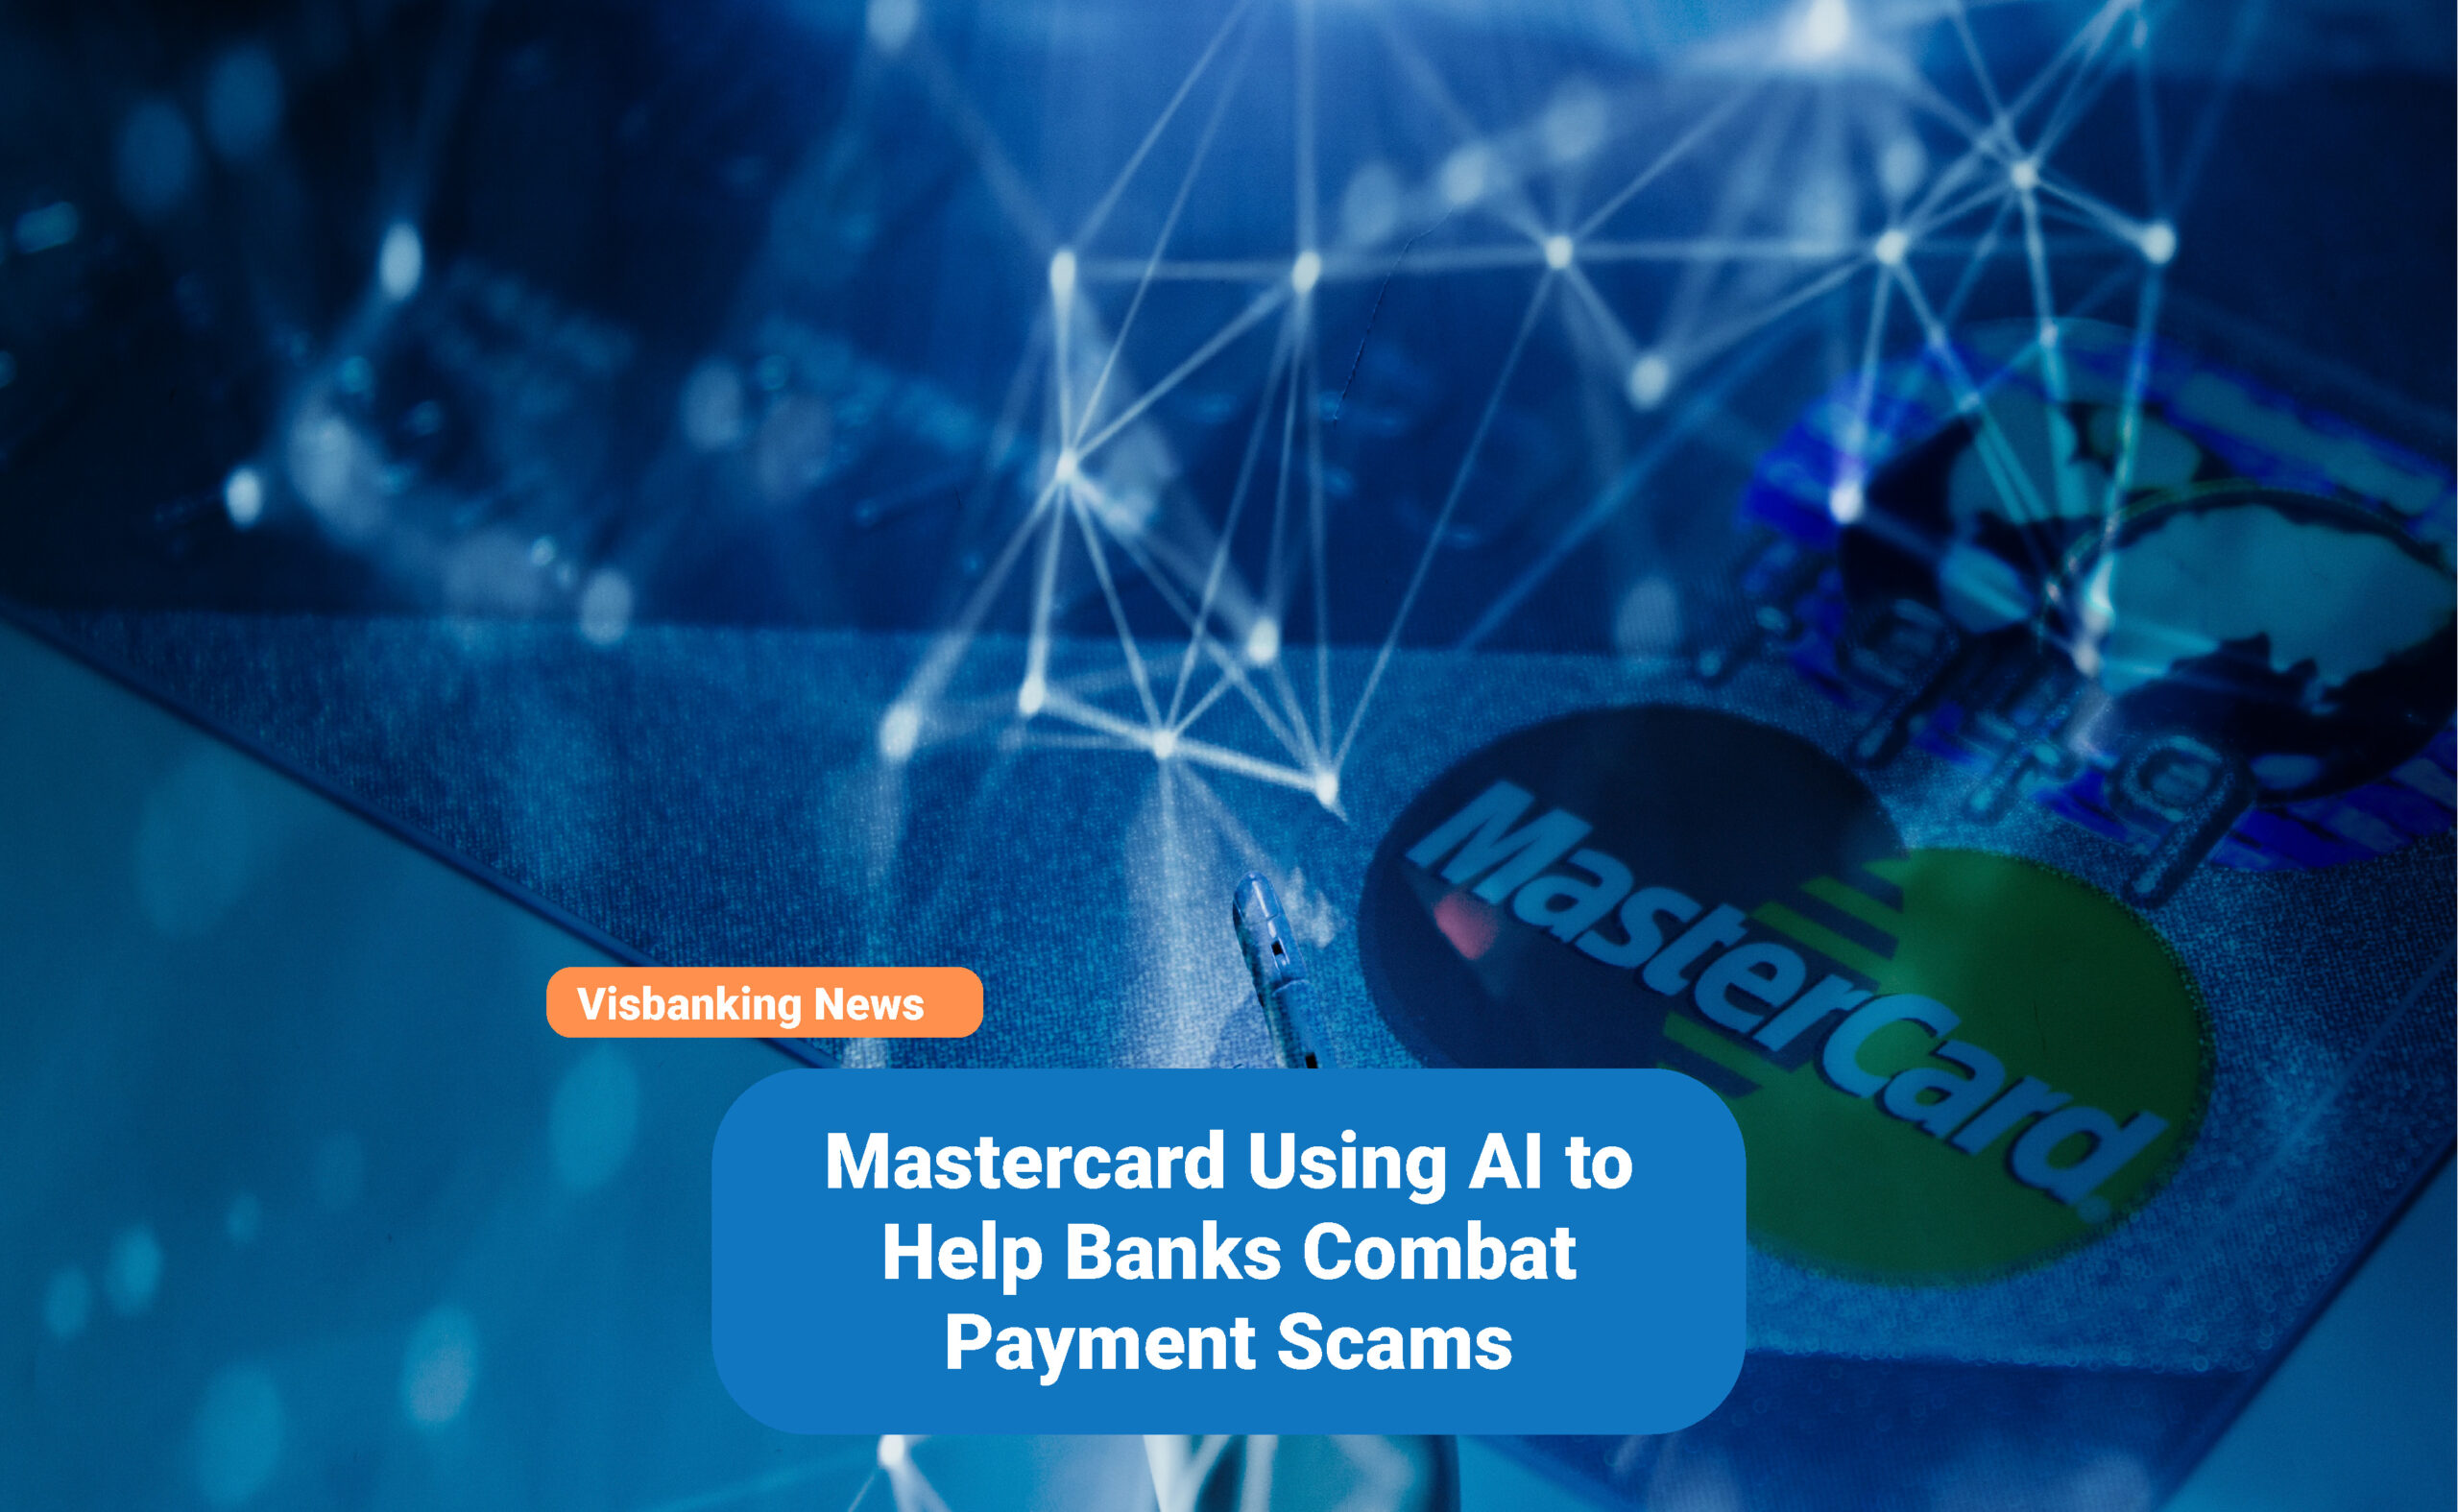 Mastercard Using AI to Help Banks Combat Payment Scams